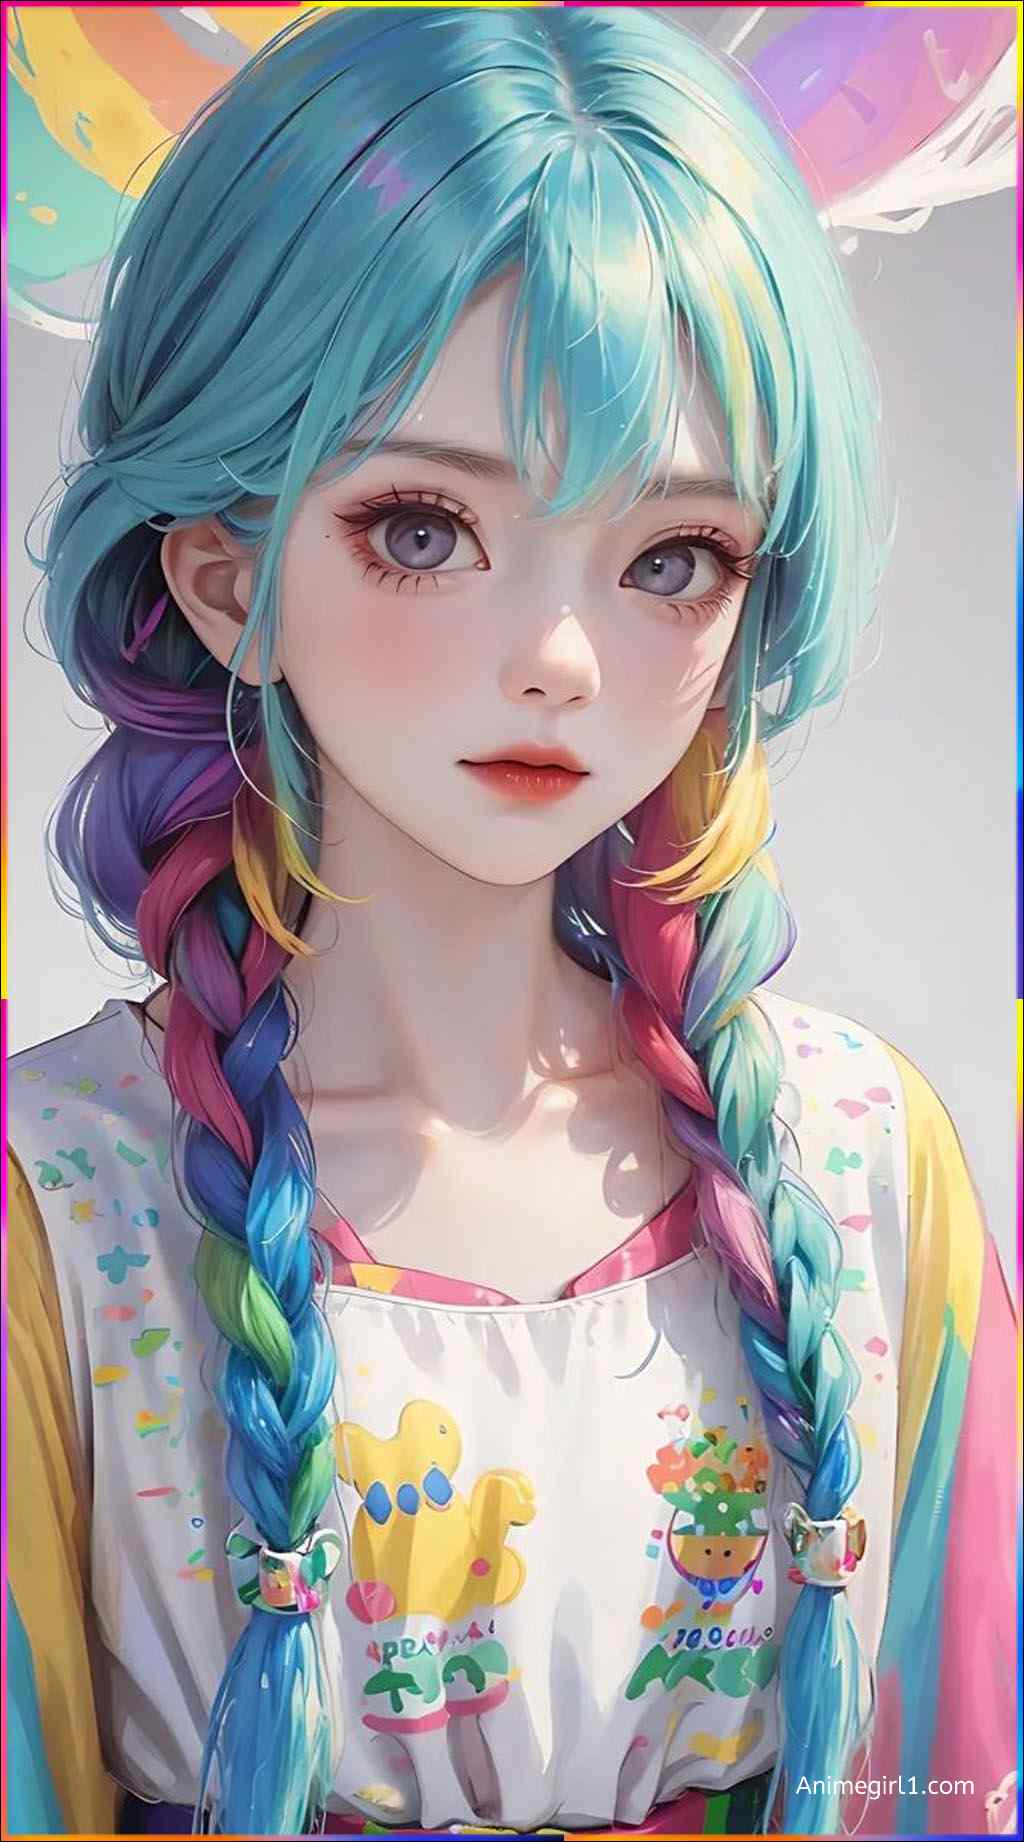 anime girl with colored hair